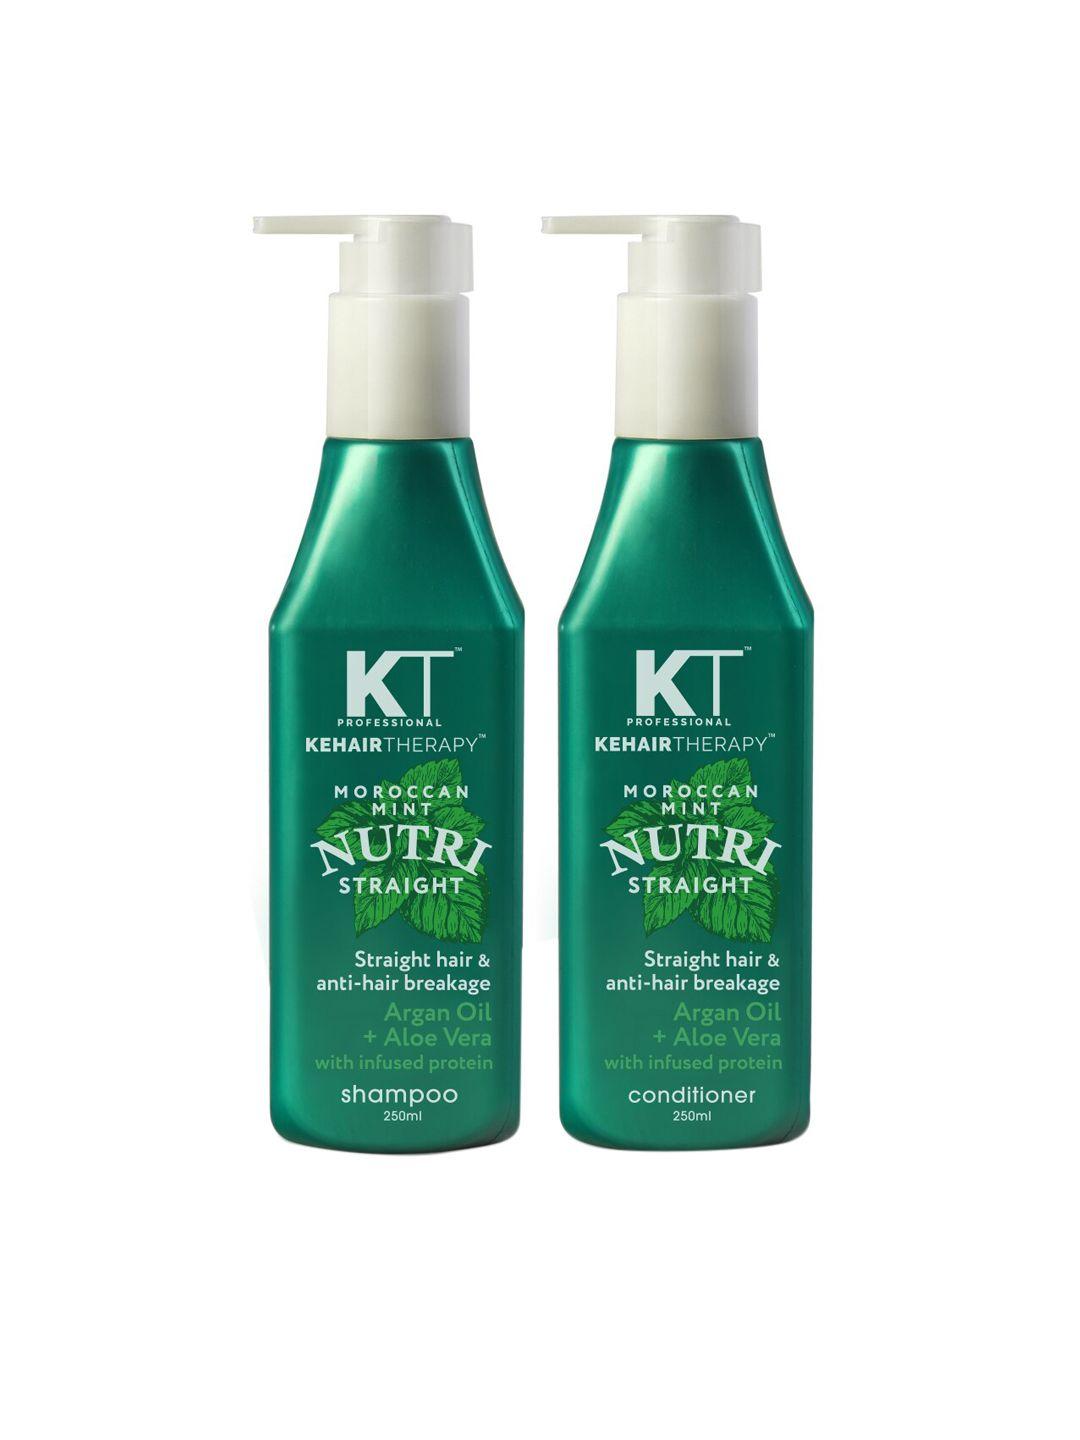 kehairtherapy kt professional nutri straight shampoo & conditioner 500 ml